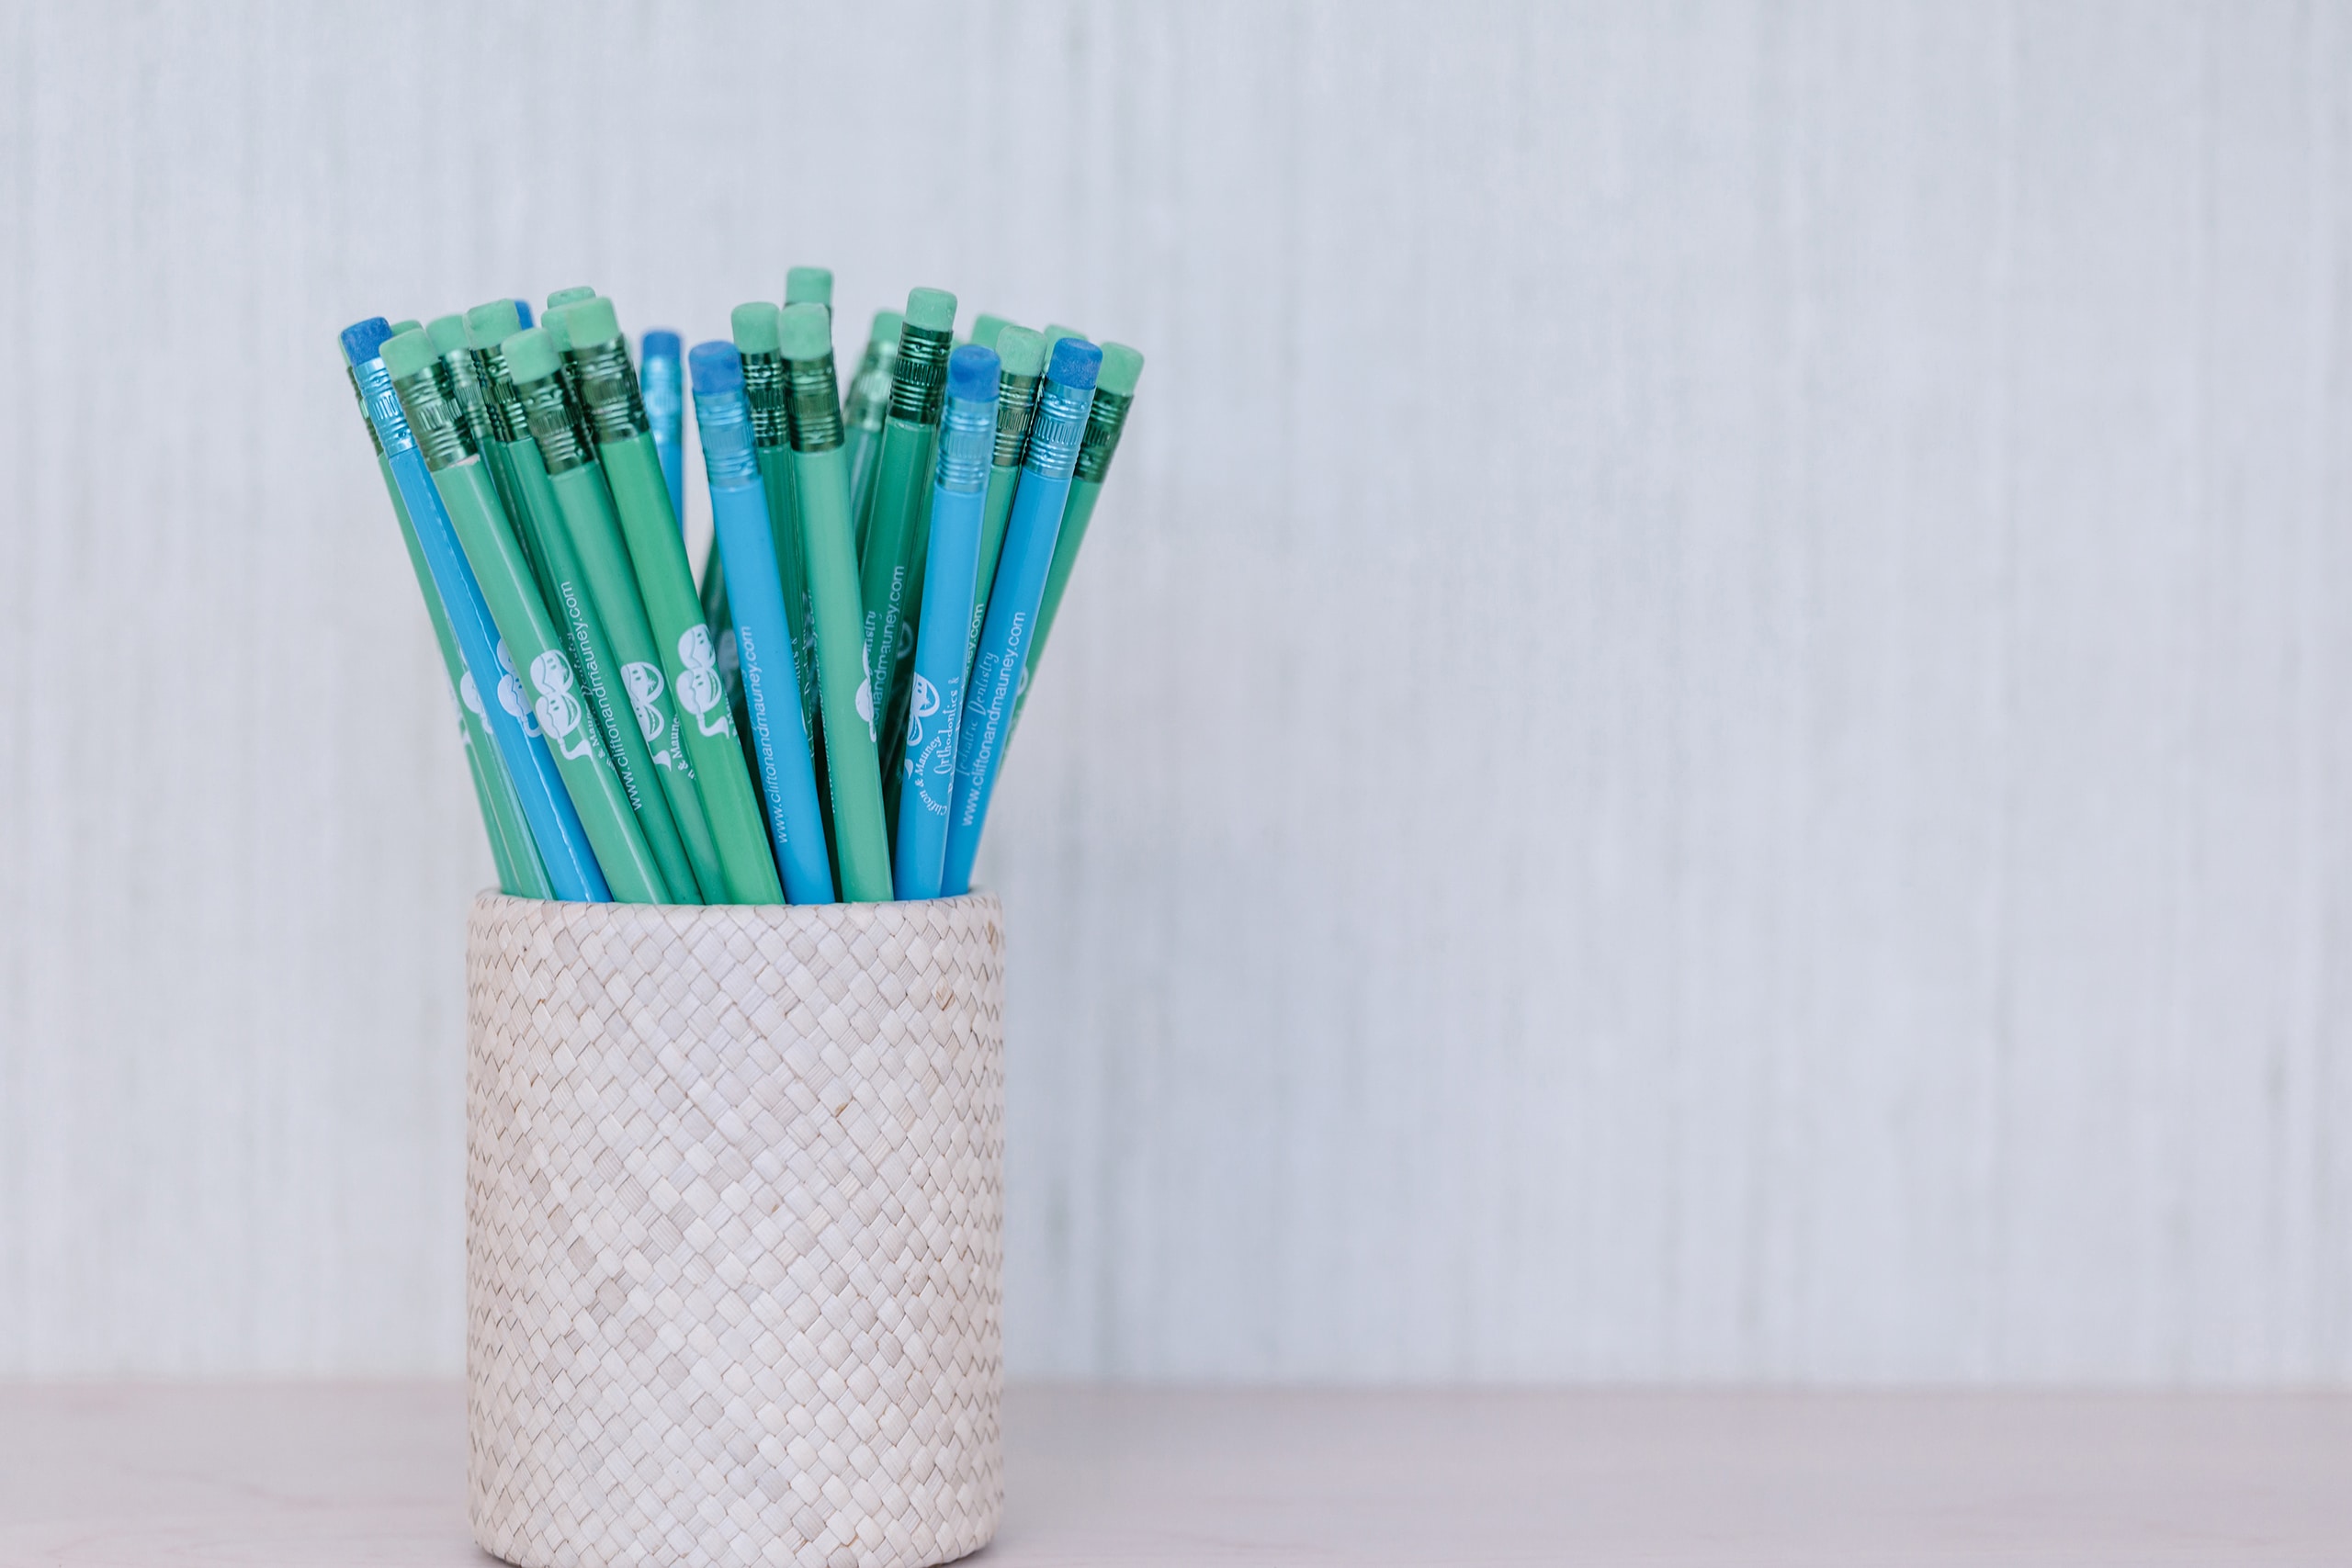 A woven pencil case filled with blue and green pencils.